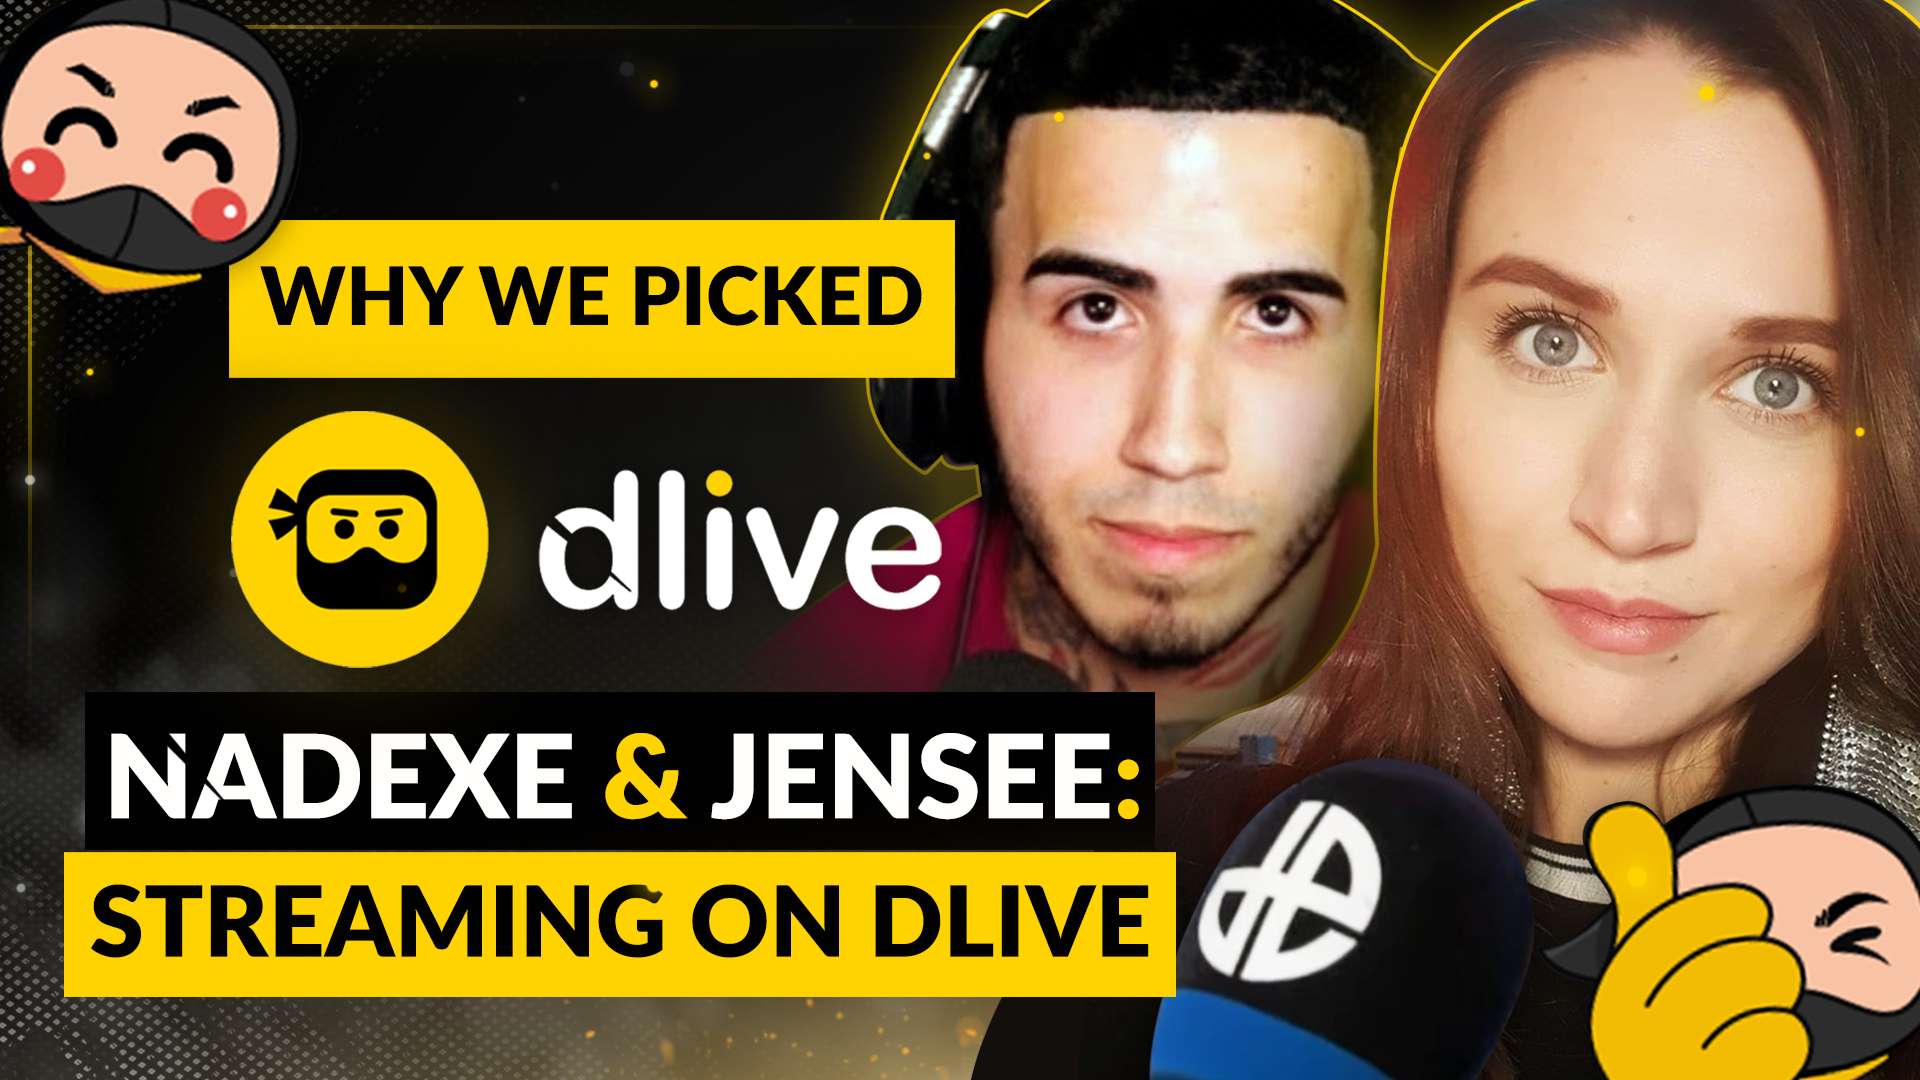 DLive streamers